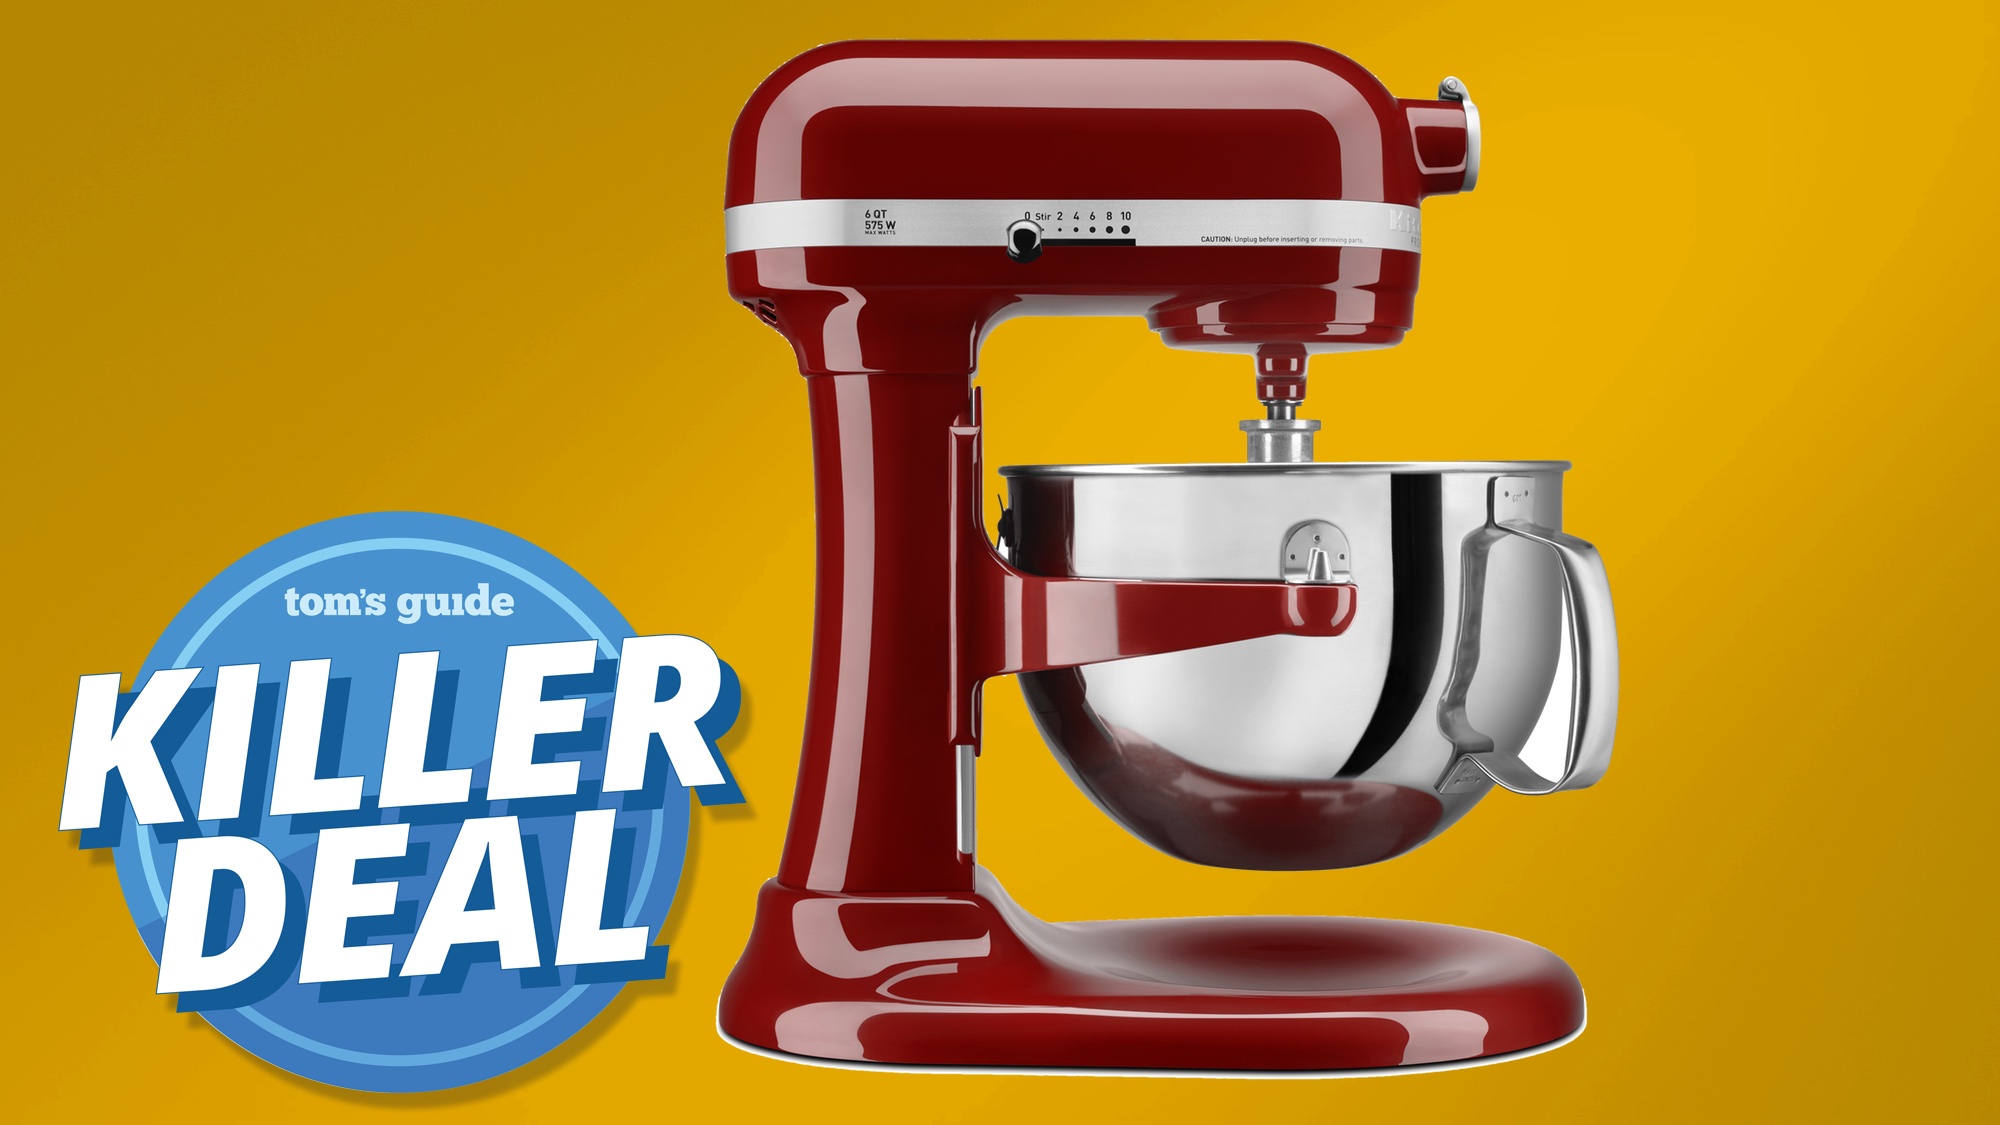 My favorite KitchenAid mixer is now 44 off for Black Friday Tom's Guide